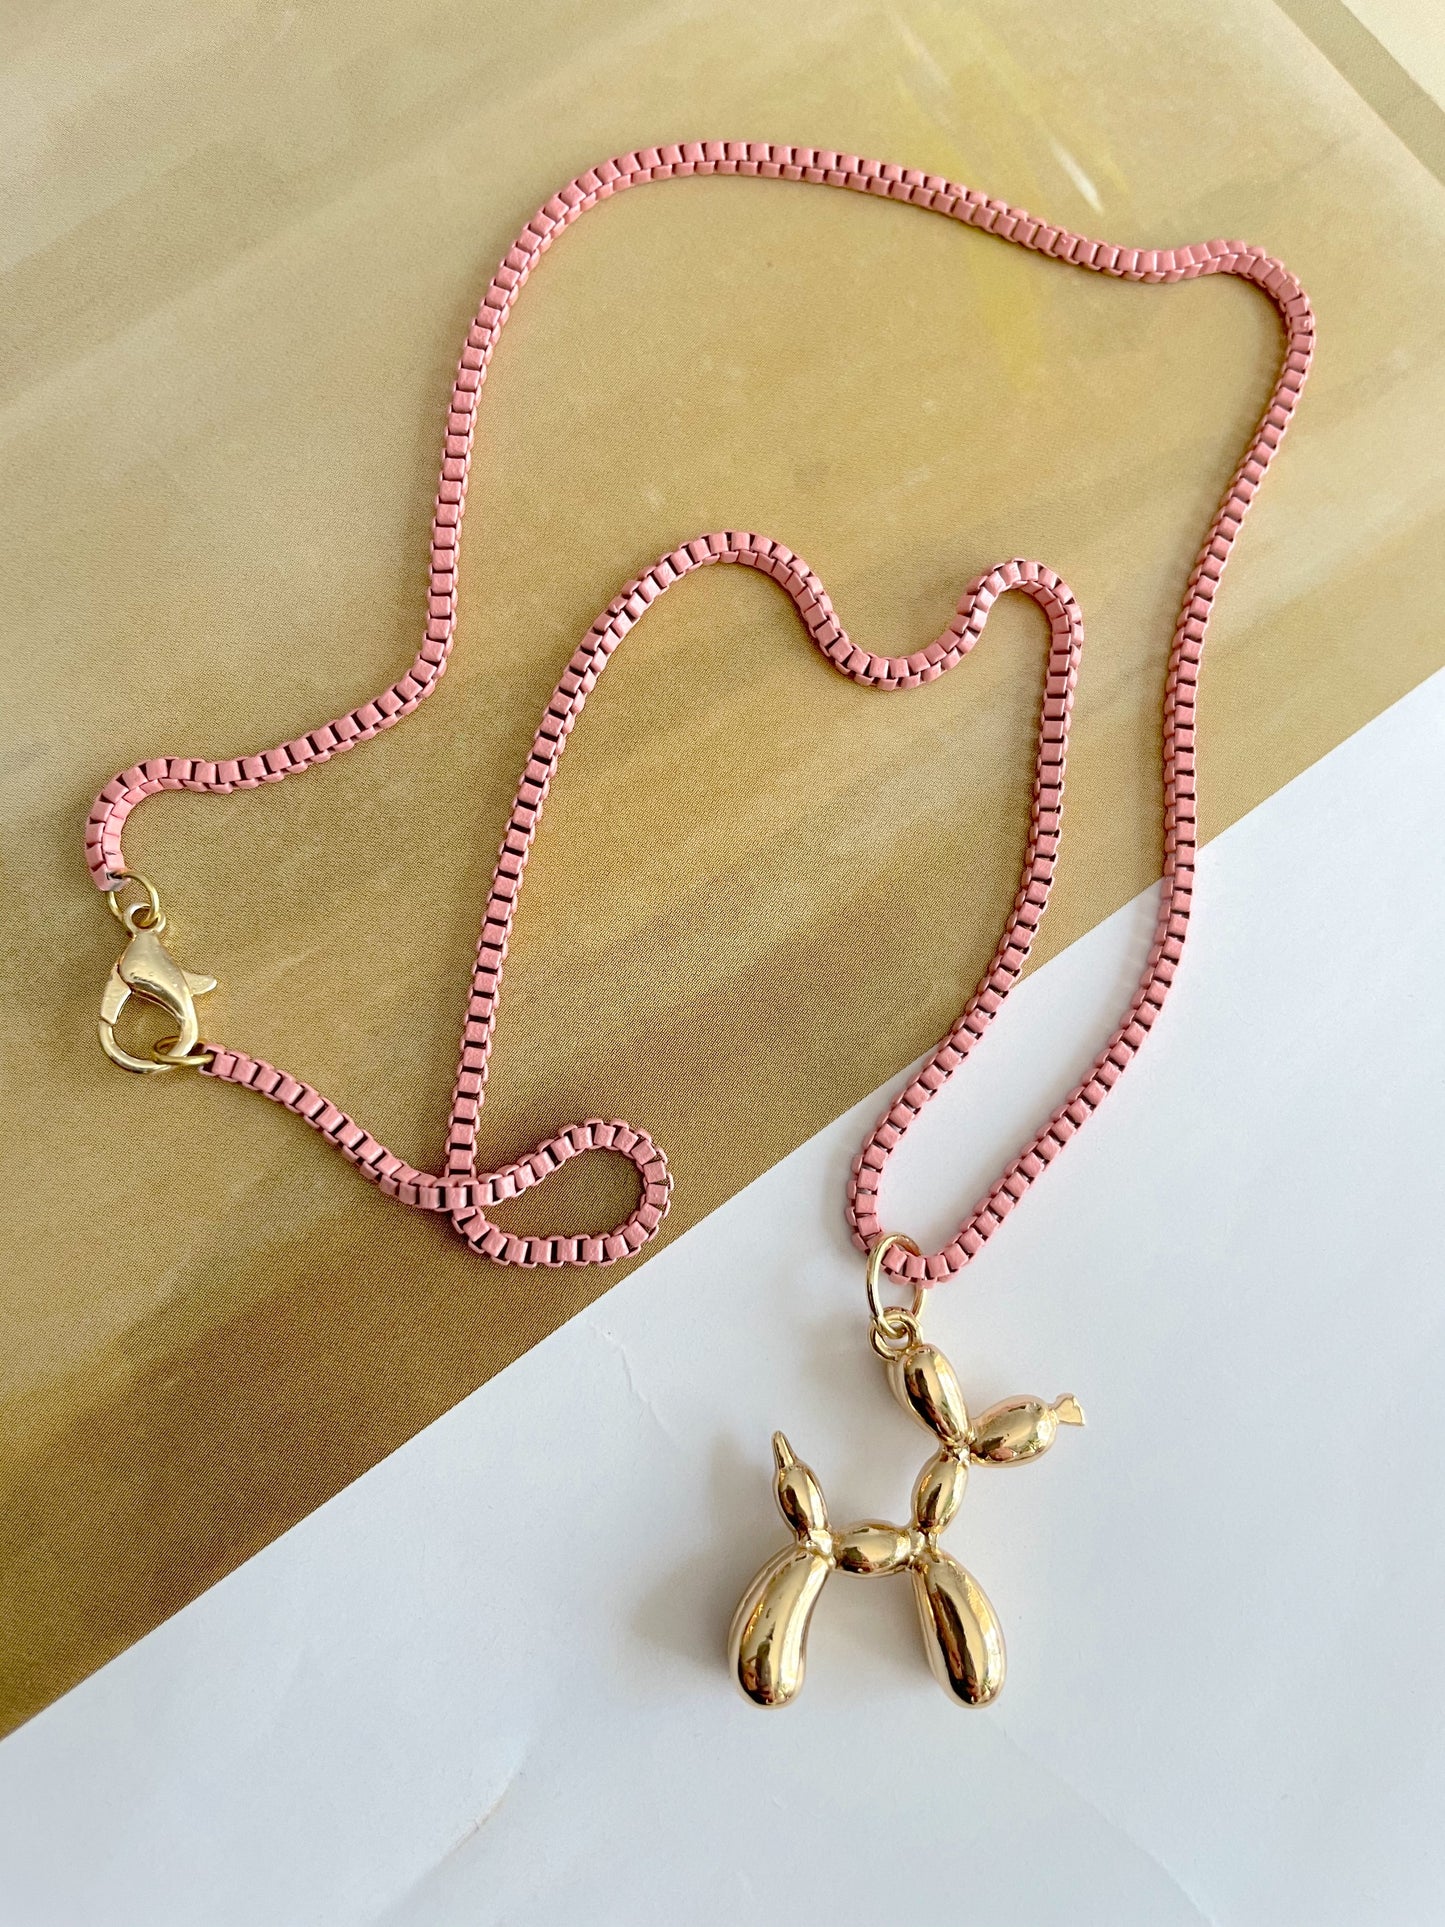 Balloon Dog Colored necklaces